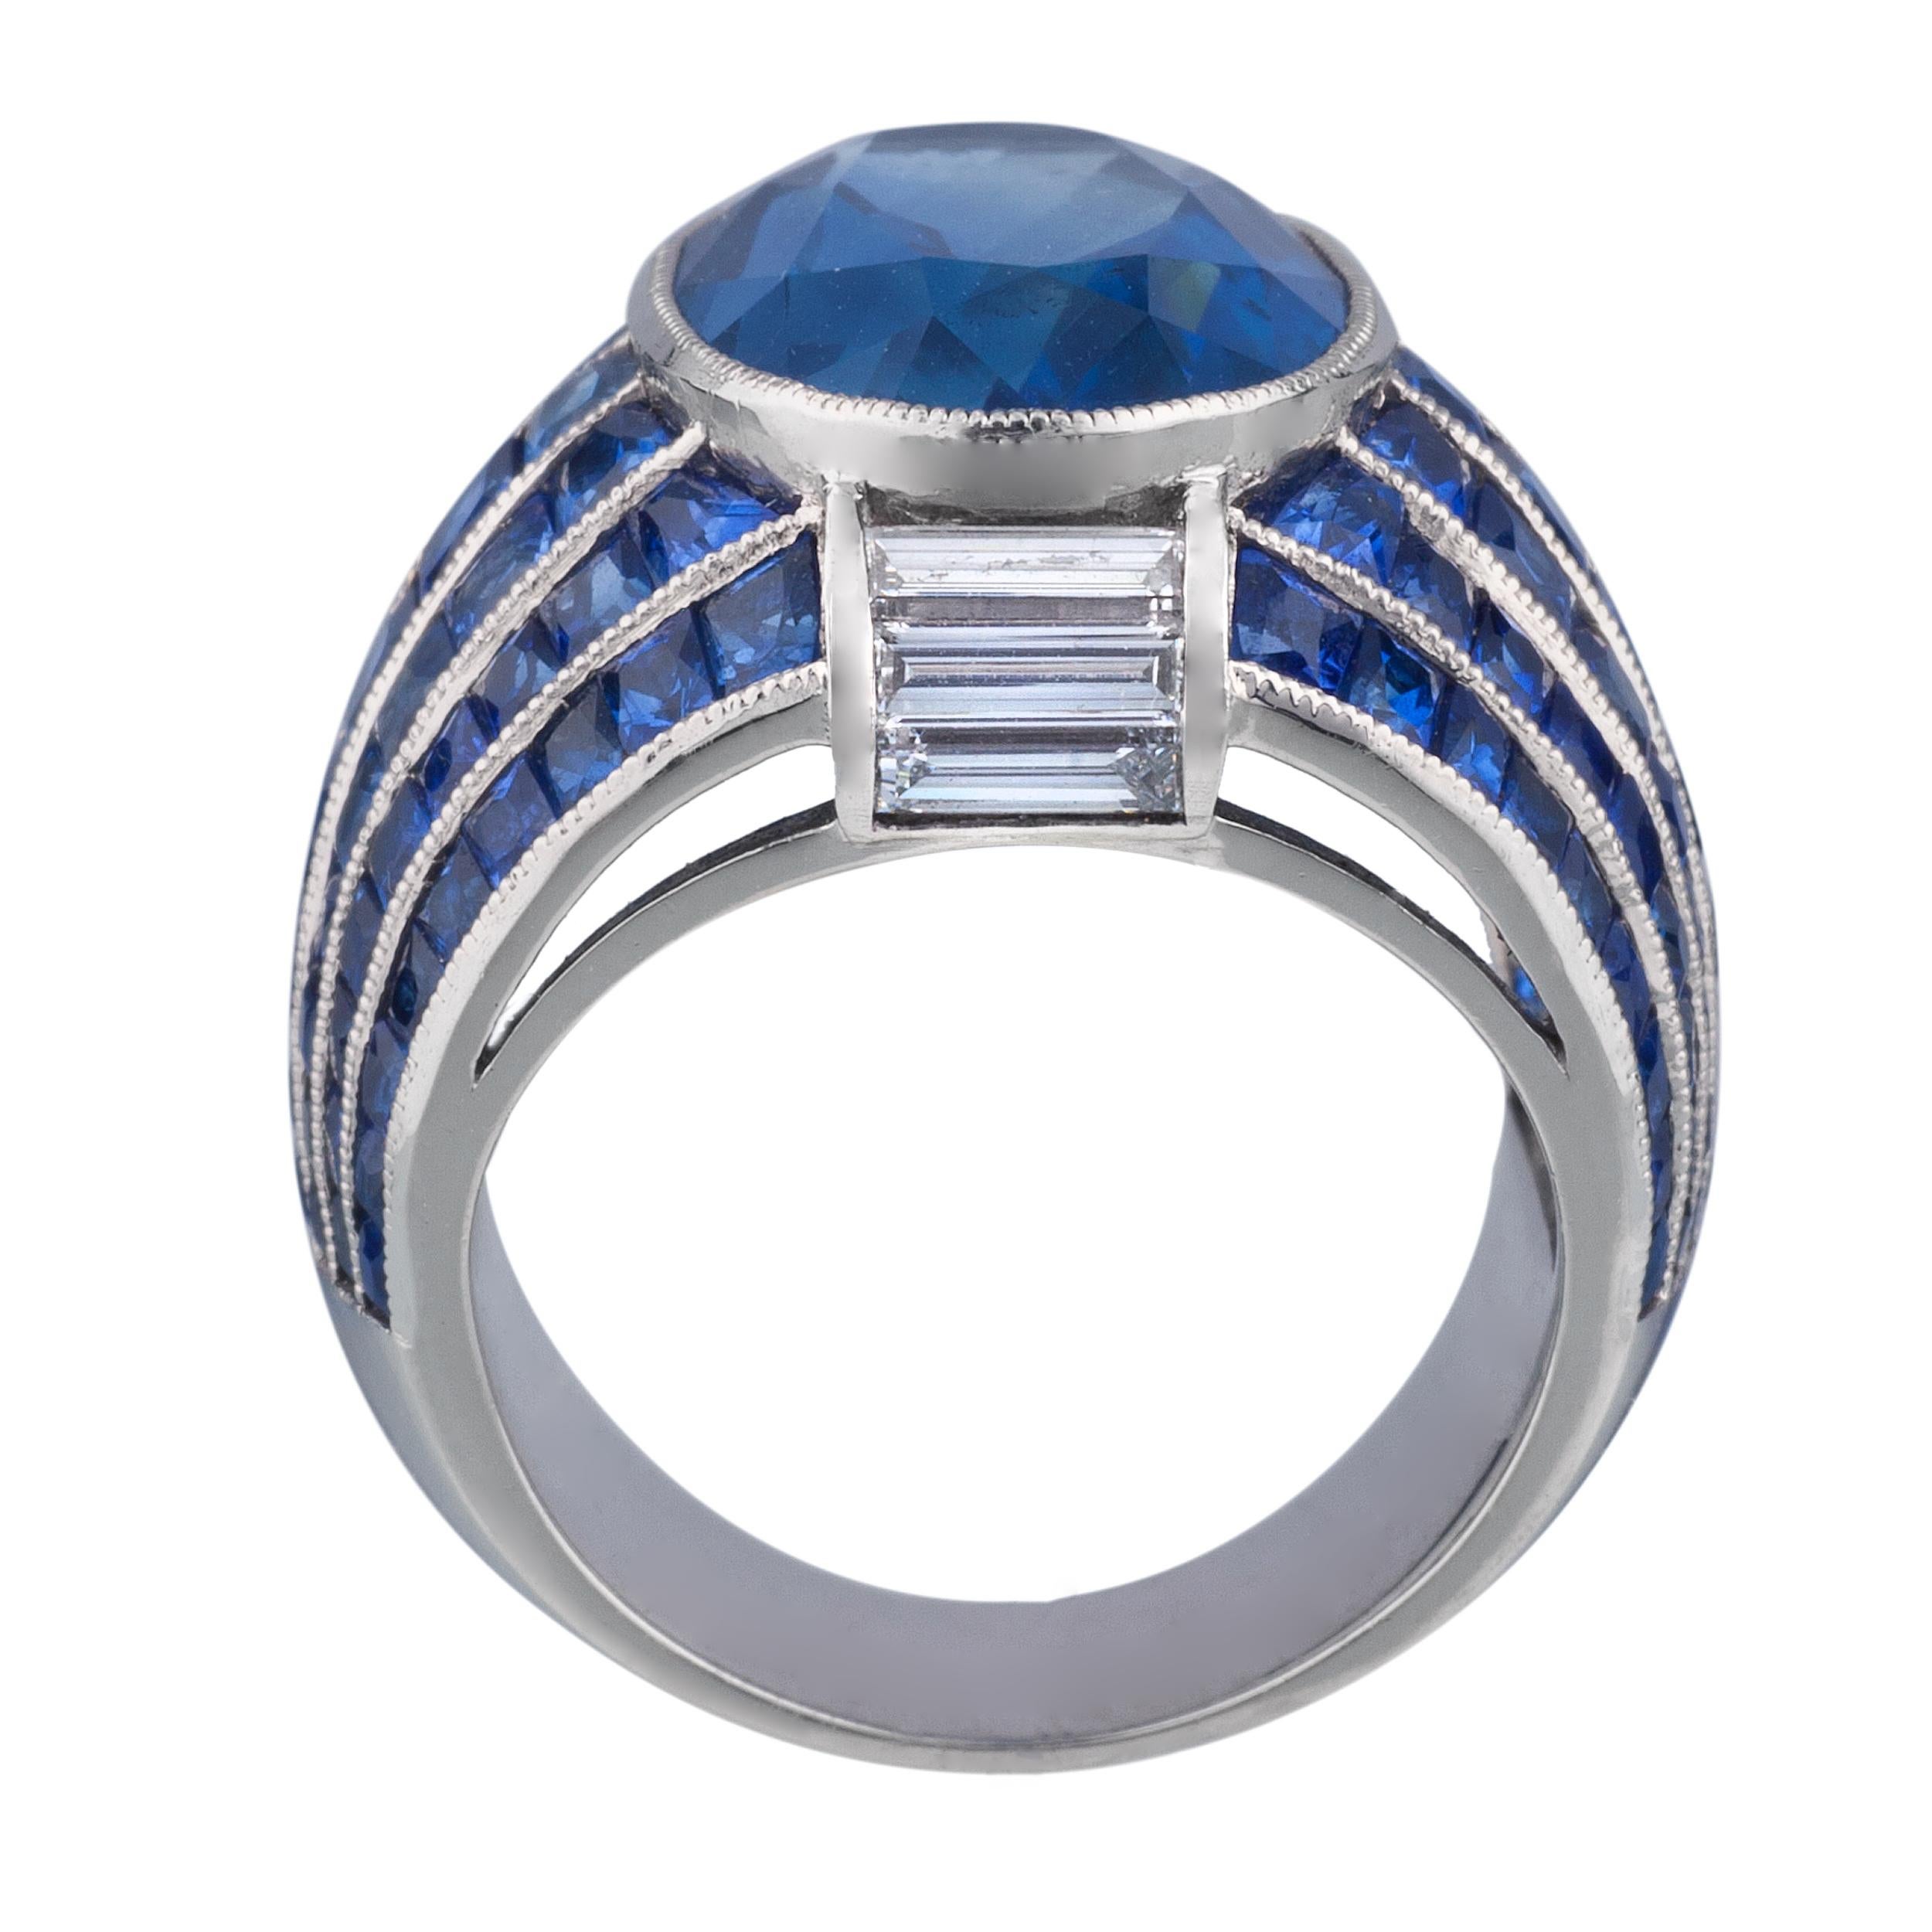 Platinum Ring with 13.53 carat Burma Sapphire and smaller sapphires weighing 7.48 carats and diamonds weighing 0.69 carats.